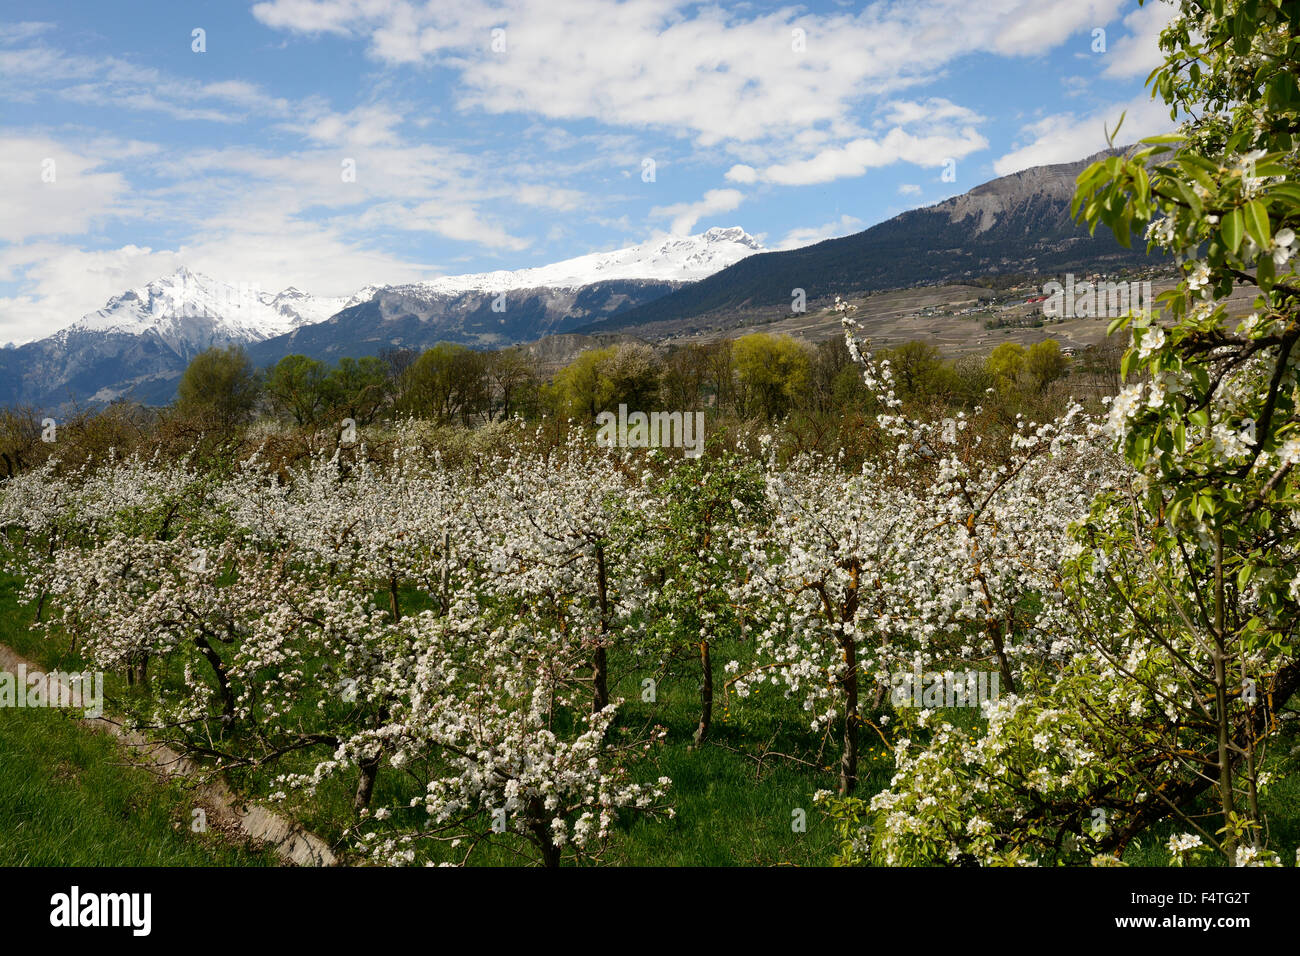 Fruit trees, blooming, blossoms, mountains, Mt. Gond, La Fava, Alps, snow, Sion, Valais, Switzerland Stock Photo